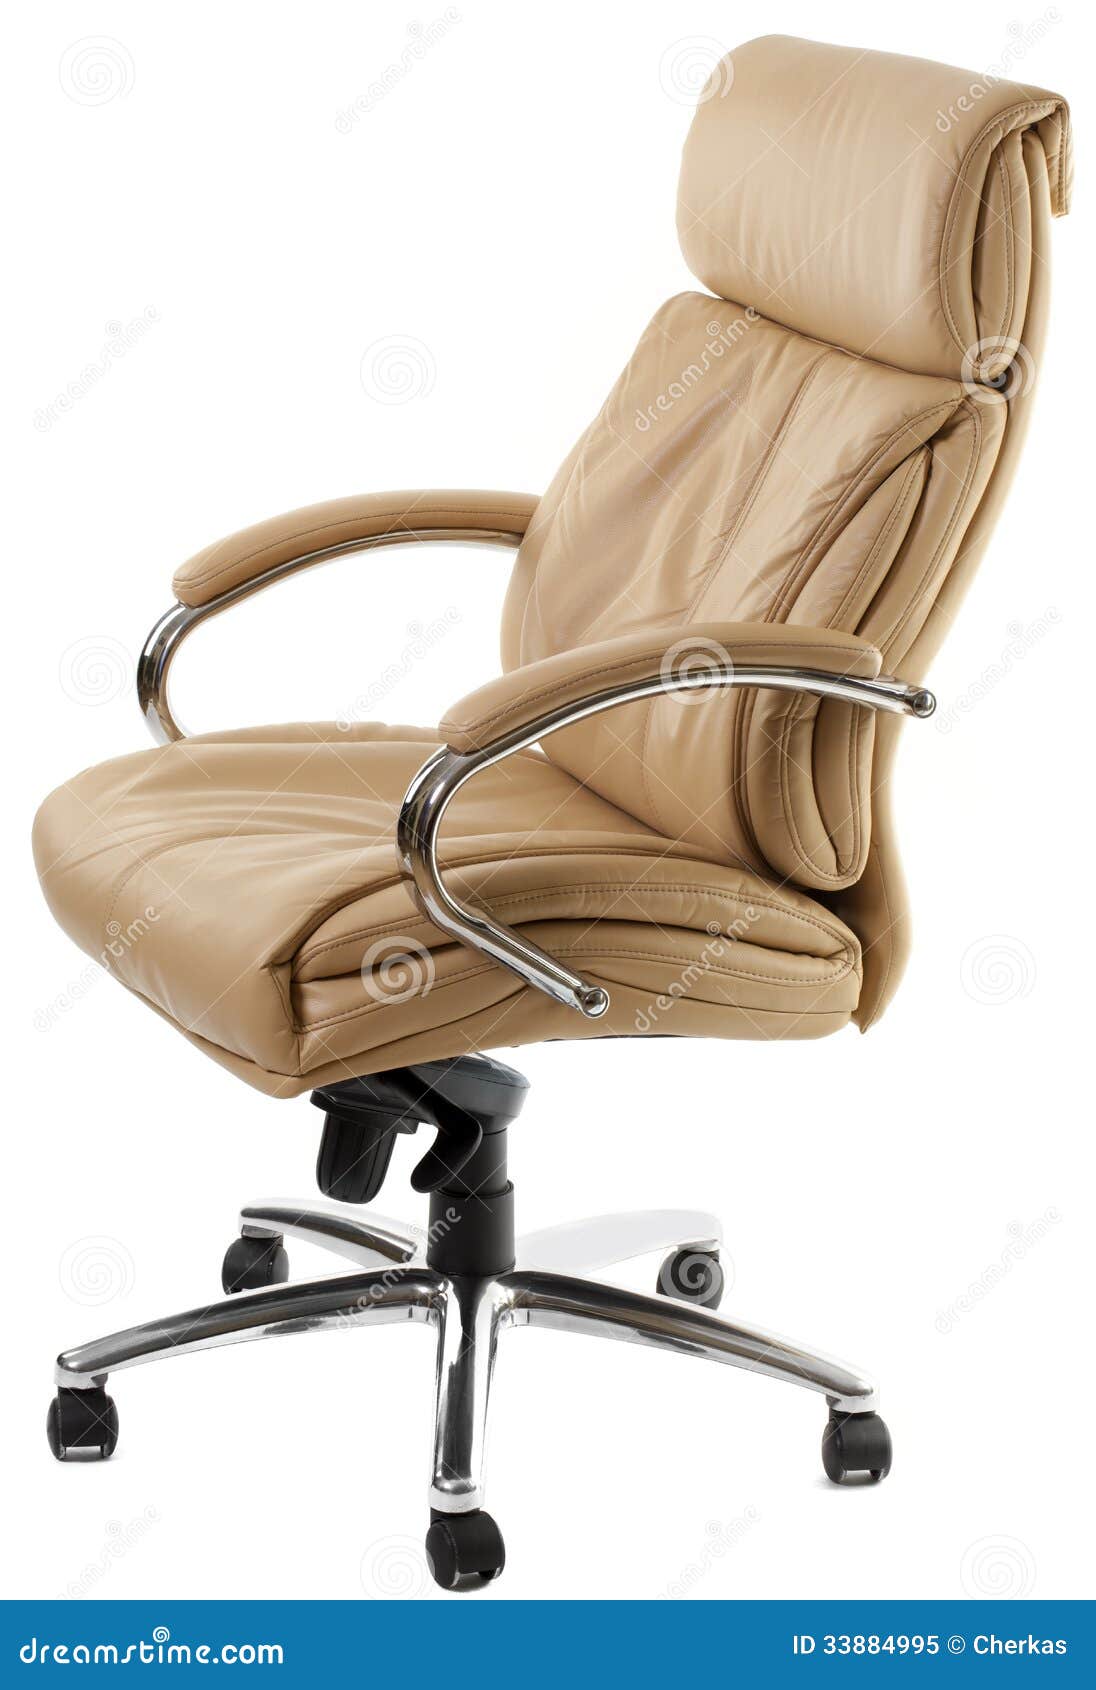 Office chair stock image. Image of interior, manager - 33884995